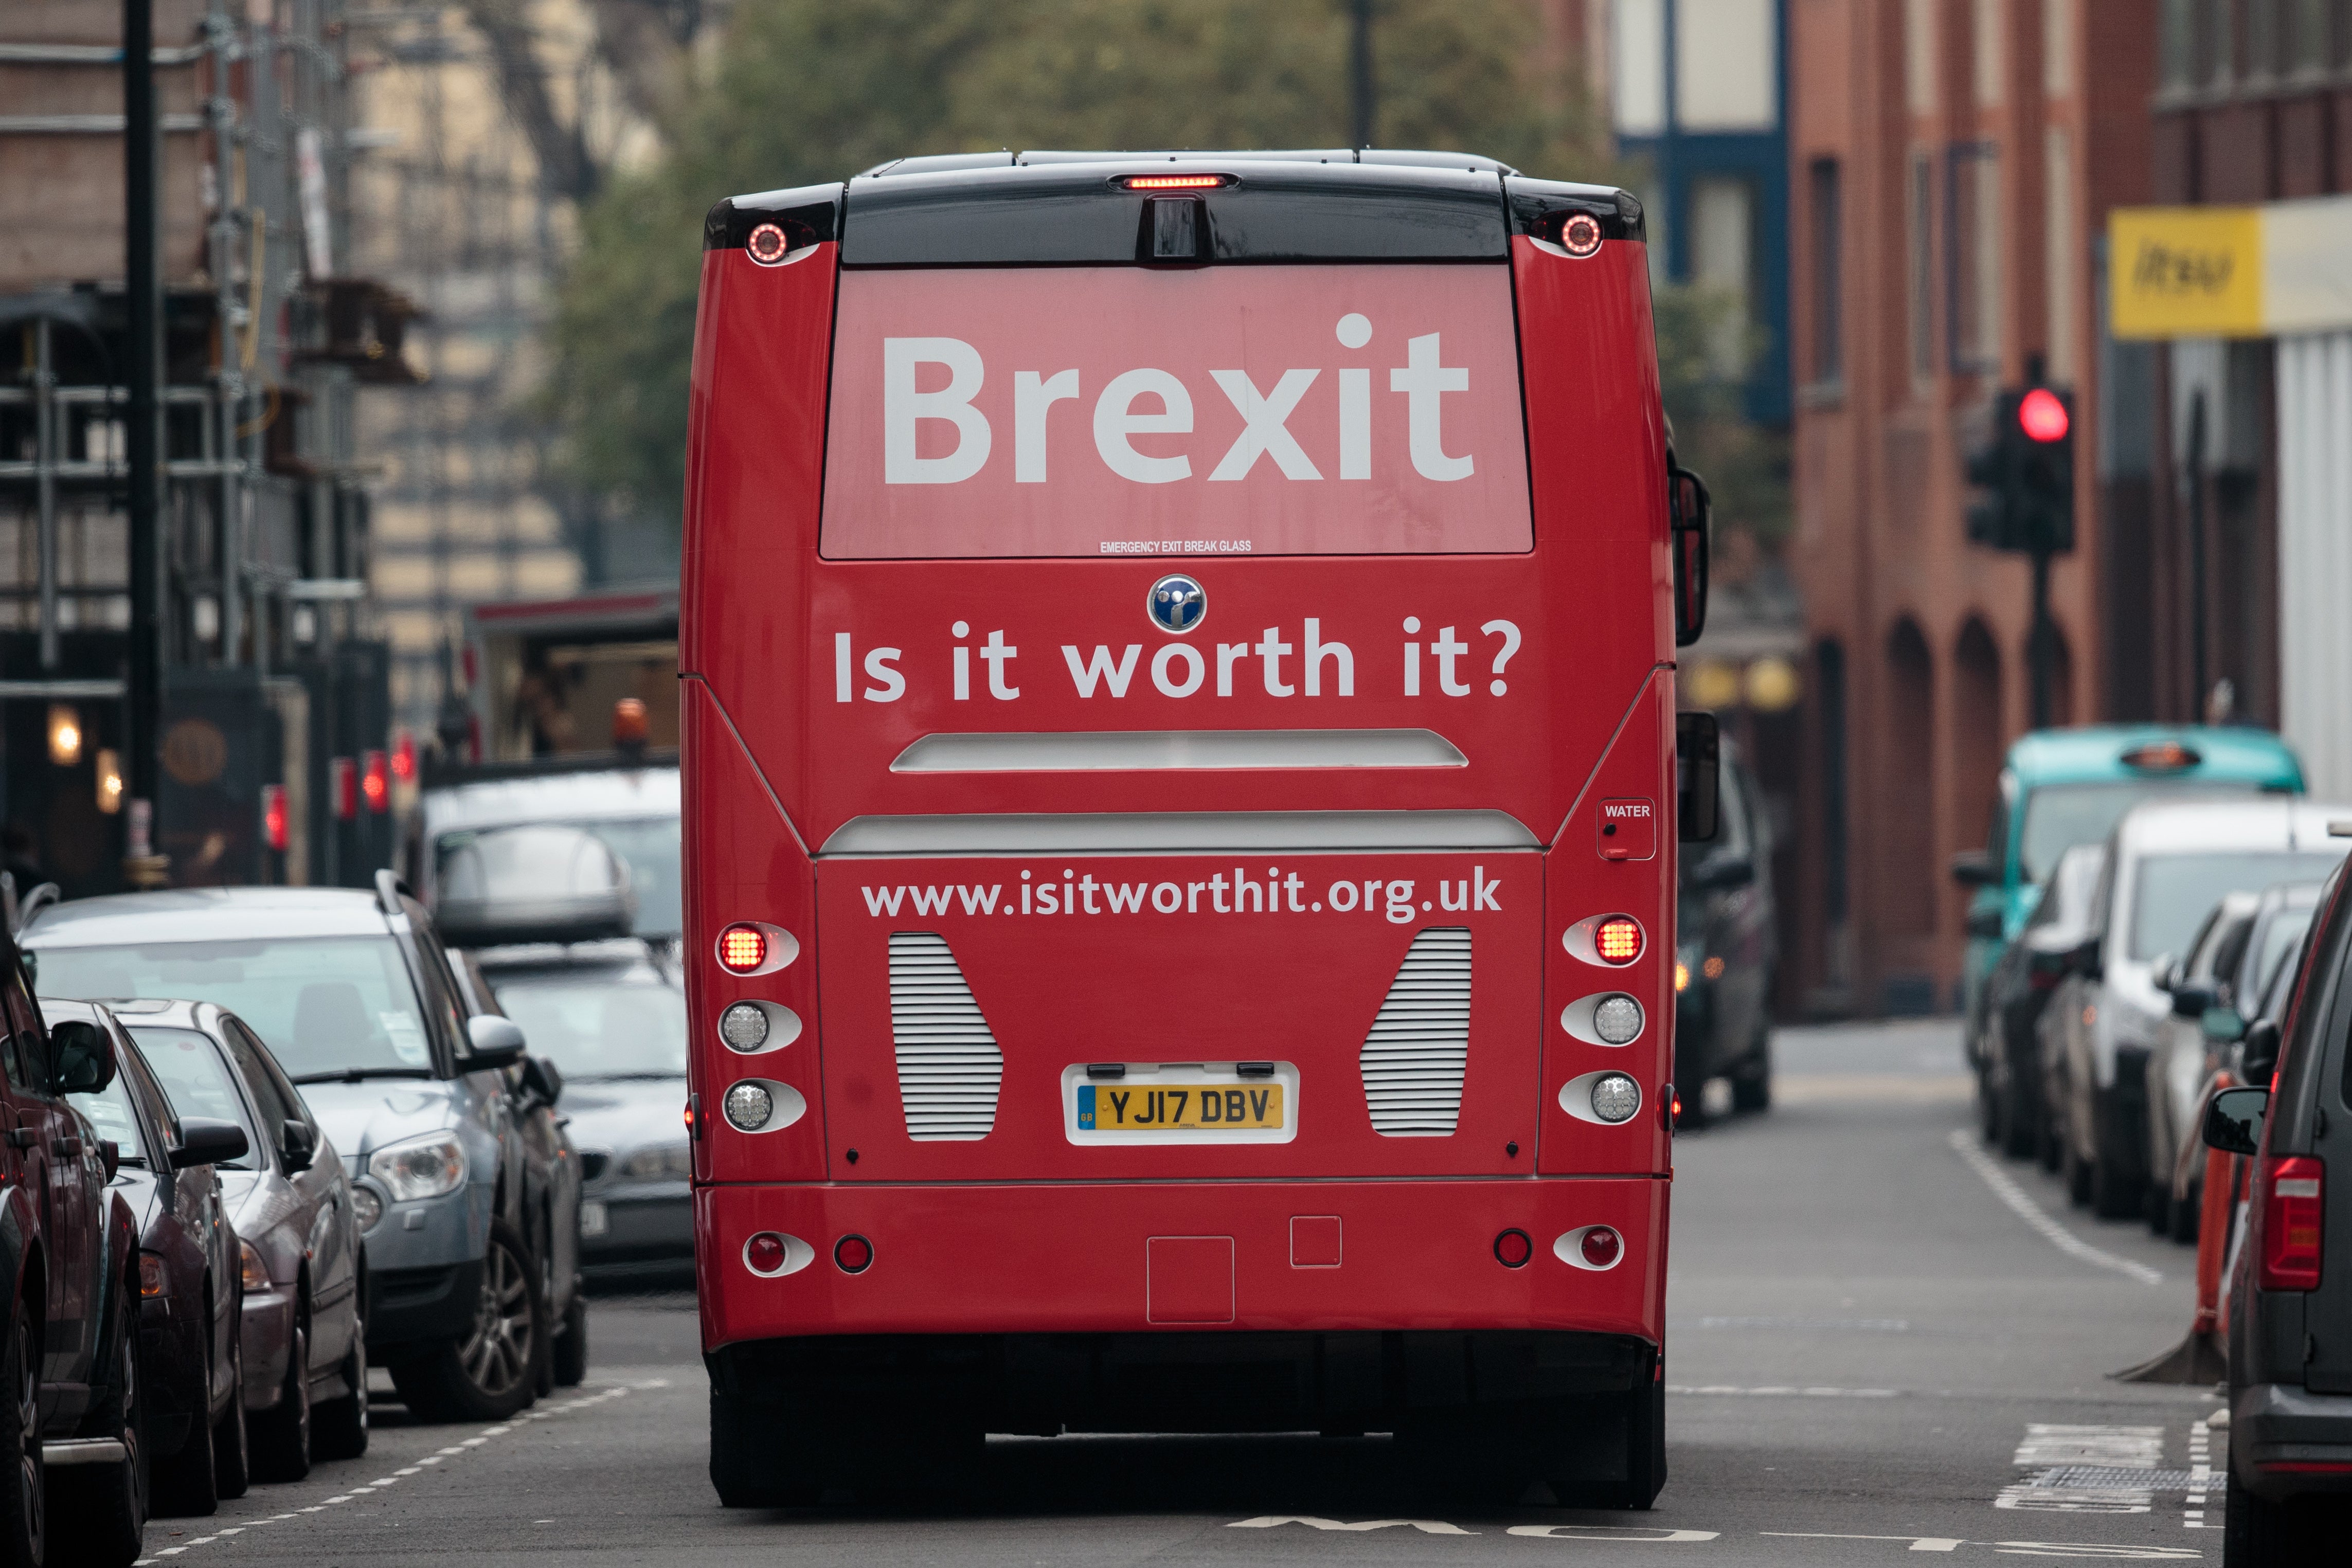 To embark on a huge and arduous national project such as Brexit requires a bit more popular consent than it got in 2016, and now it is more resented than ever